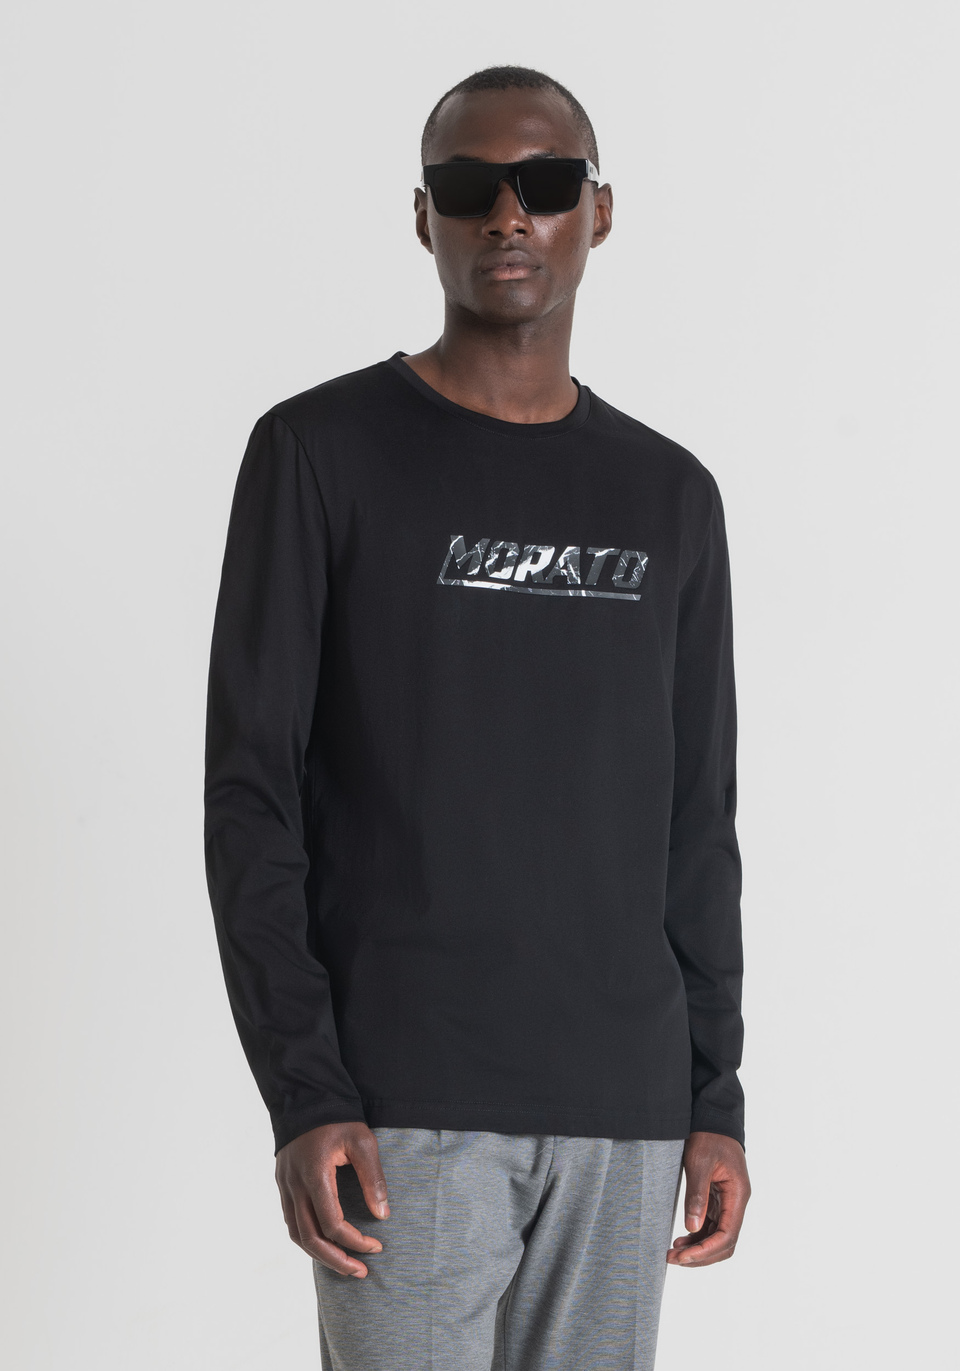 SOFT COTTON SLIM FIT SWEATER WITH RUBBERISED PRINT - Antony Morato Online Shop